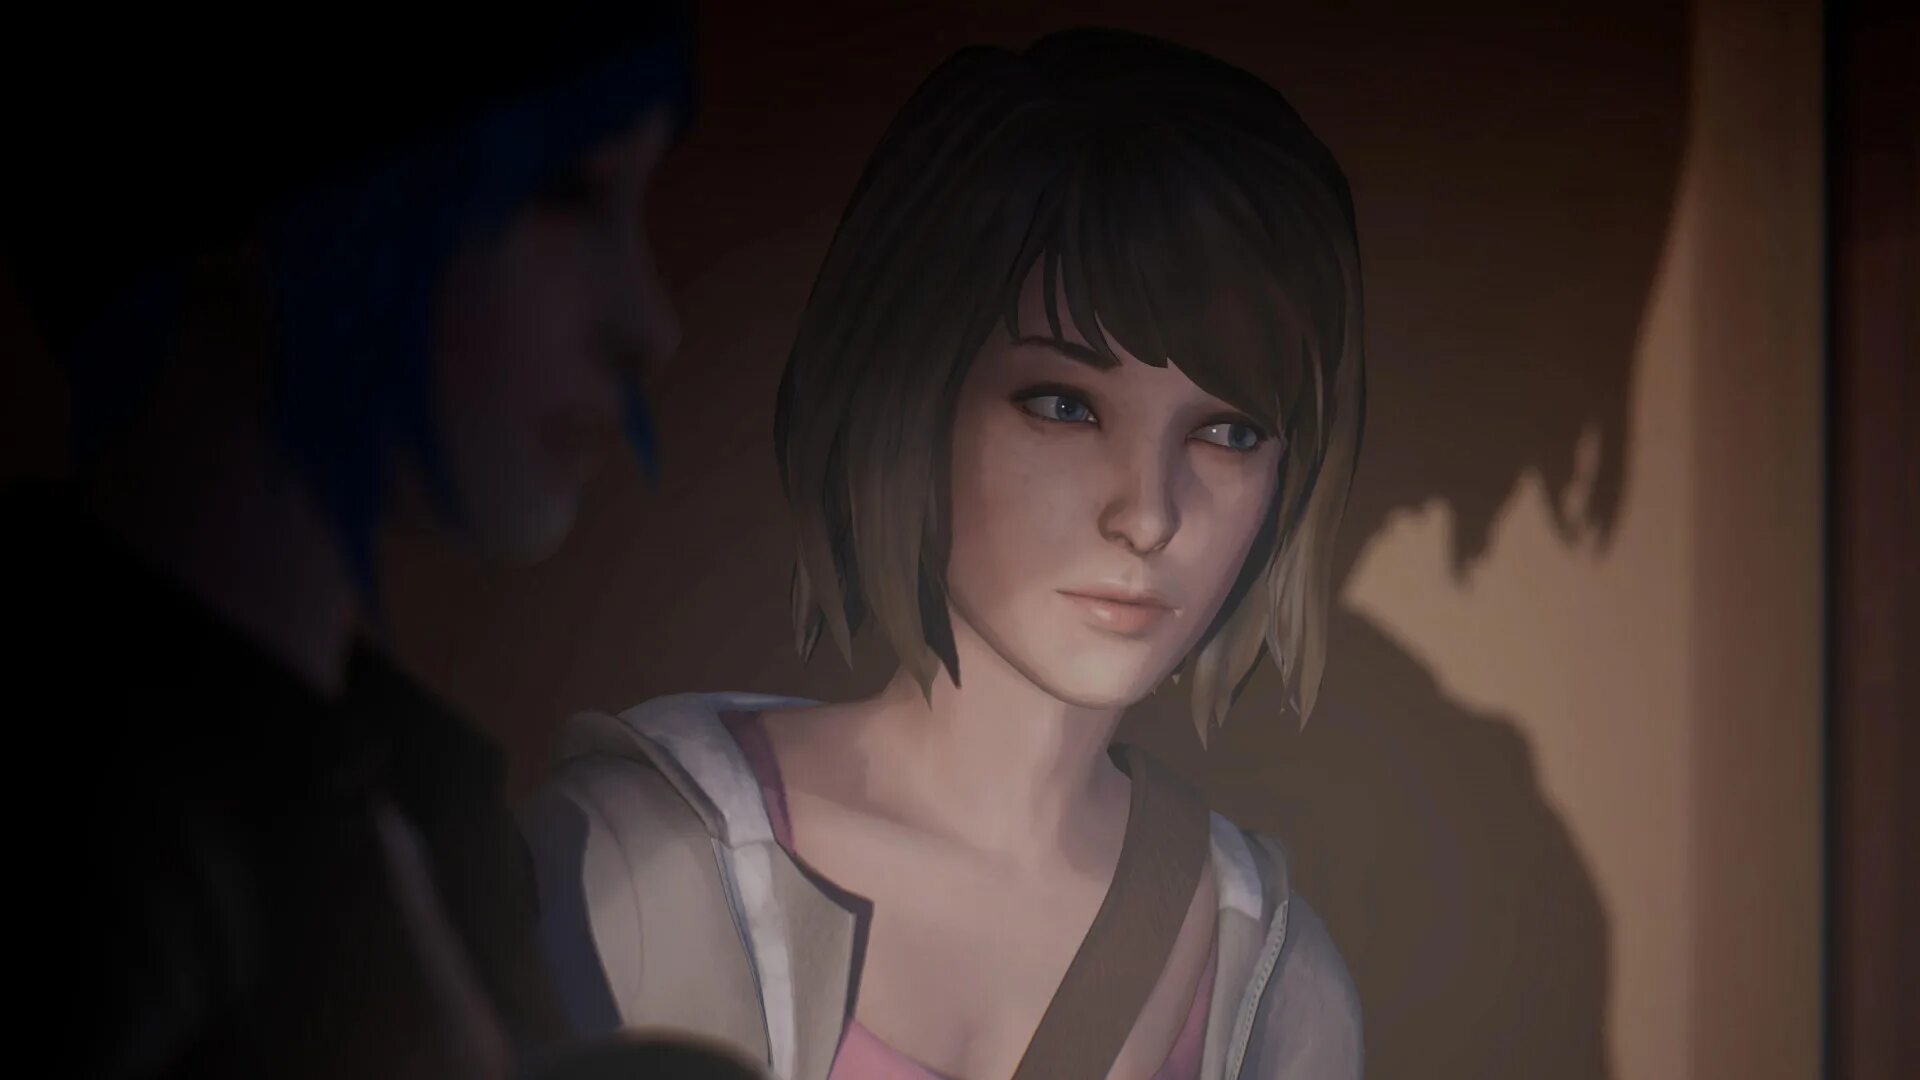 Life is life original. Life is Strange Remastered collection. Life is Strange before the Storm Remastered. Life is Strange ремастер. Макс Колфилд Life is Strange Remastered.